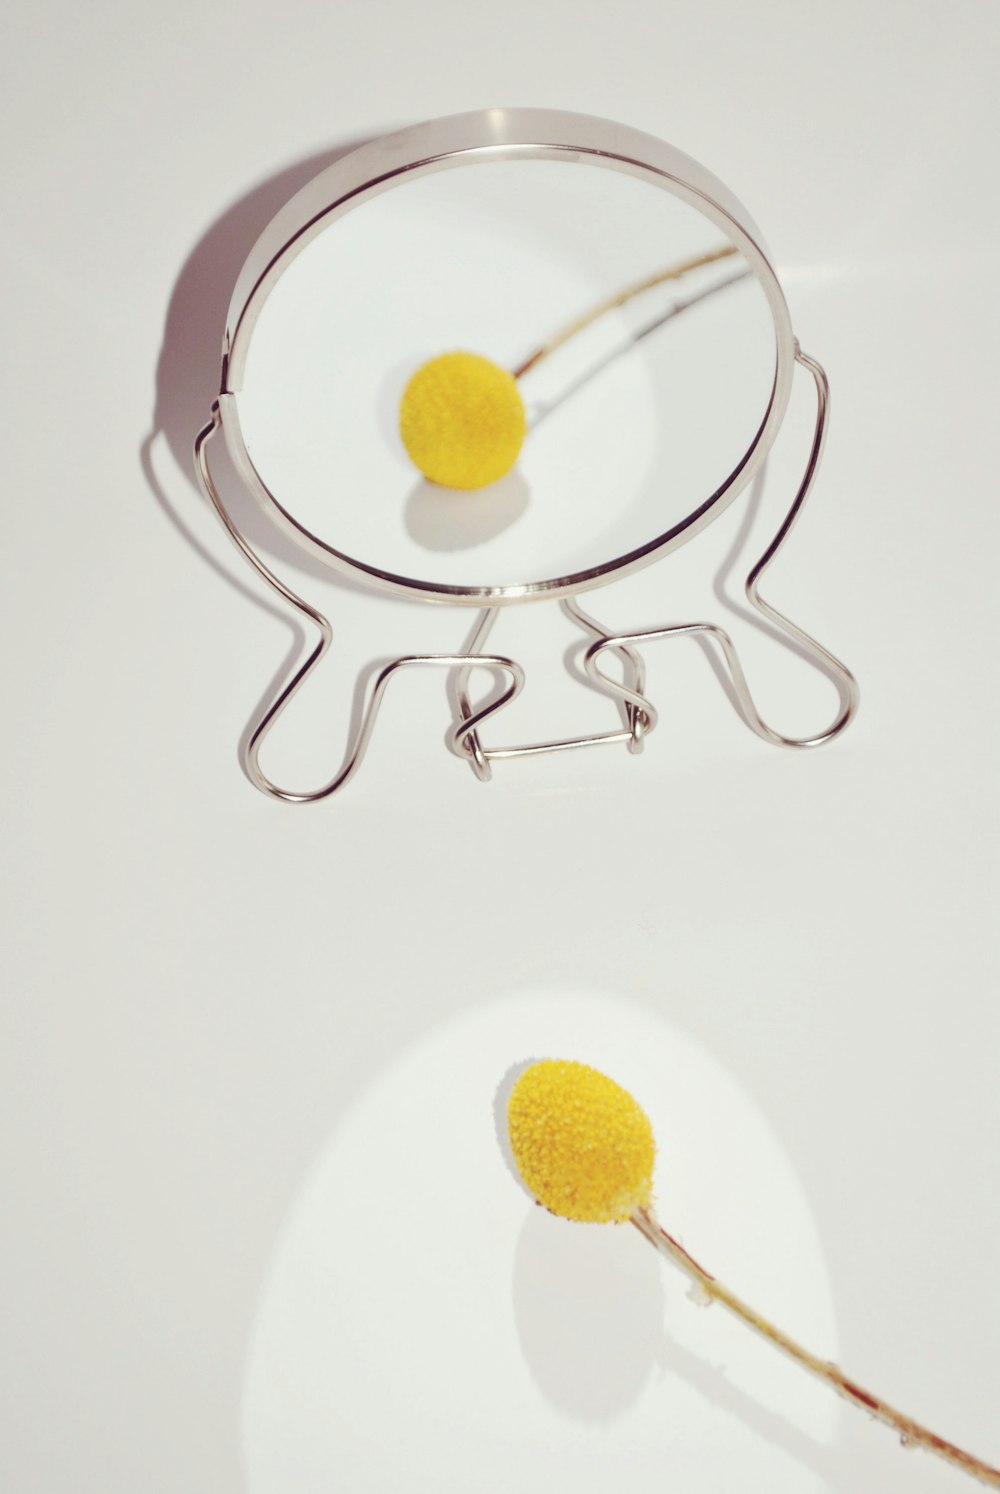 stainless steel rack with yellow round fruit